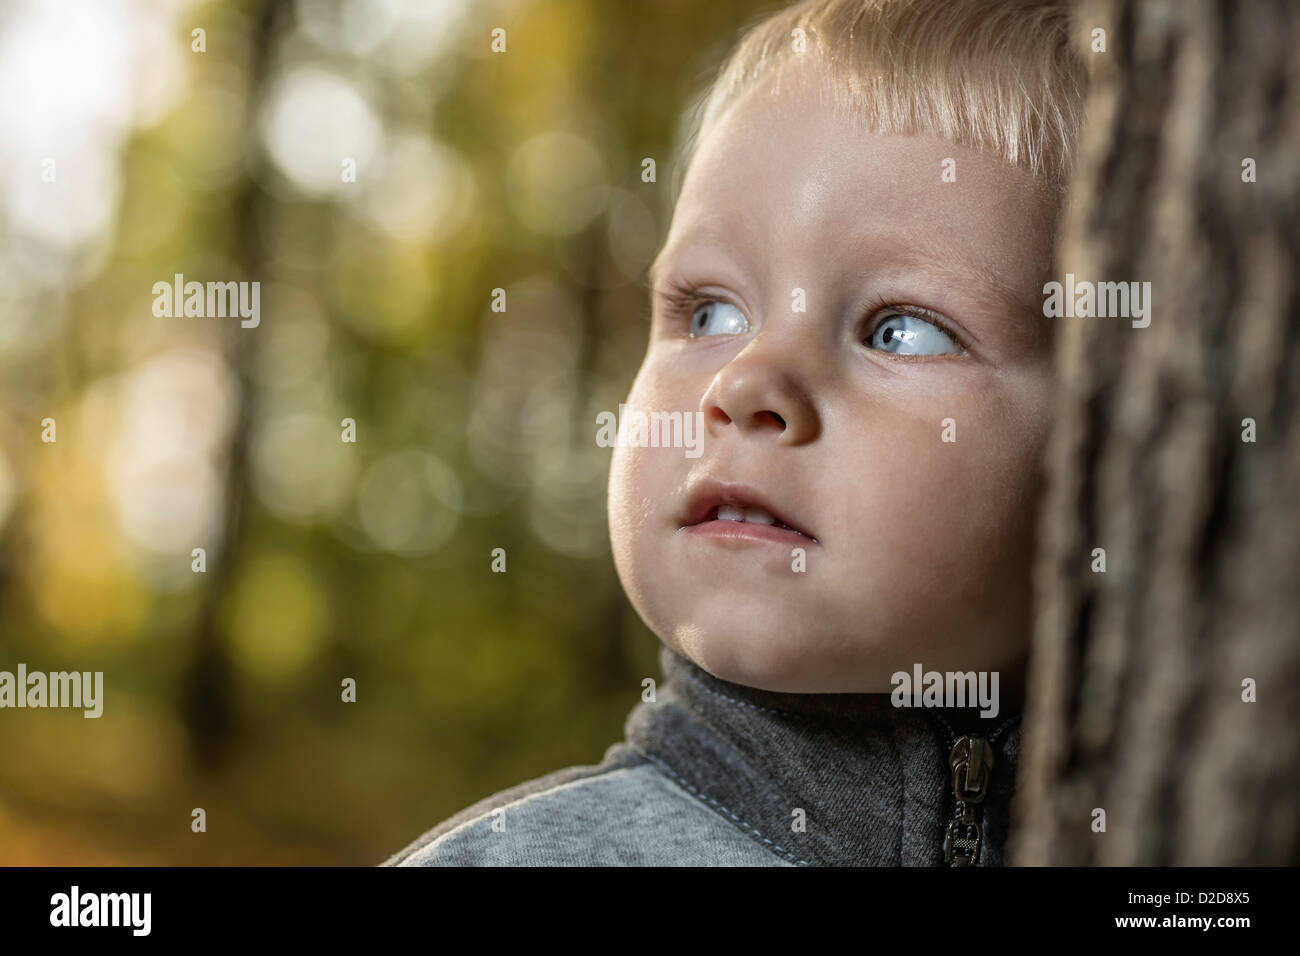 A young boy leaning against a tree trunk looking away thoughtfully Stock Photo